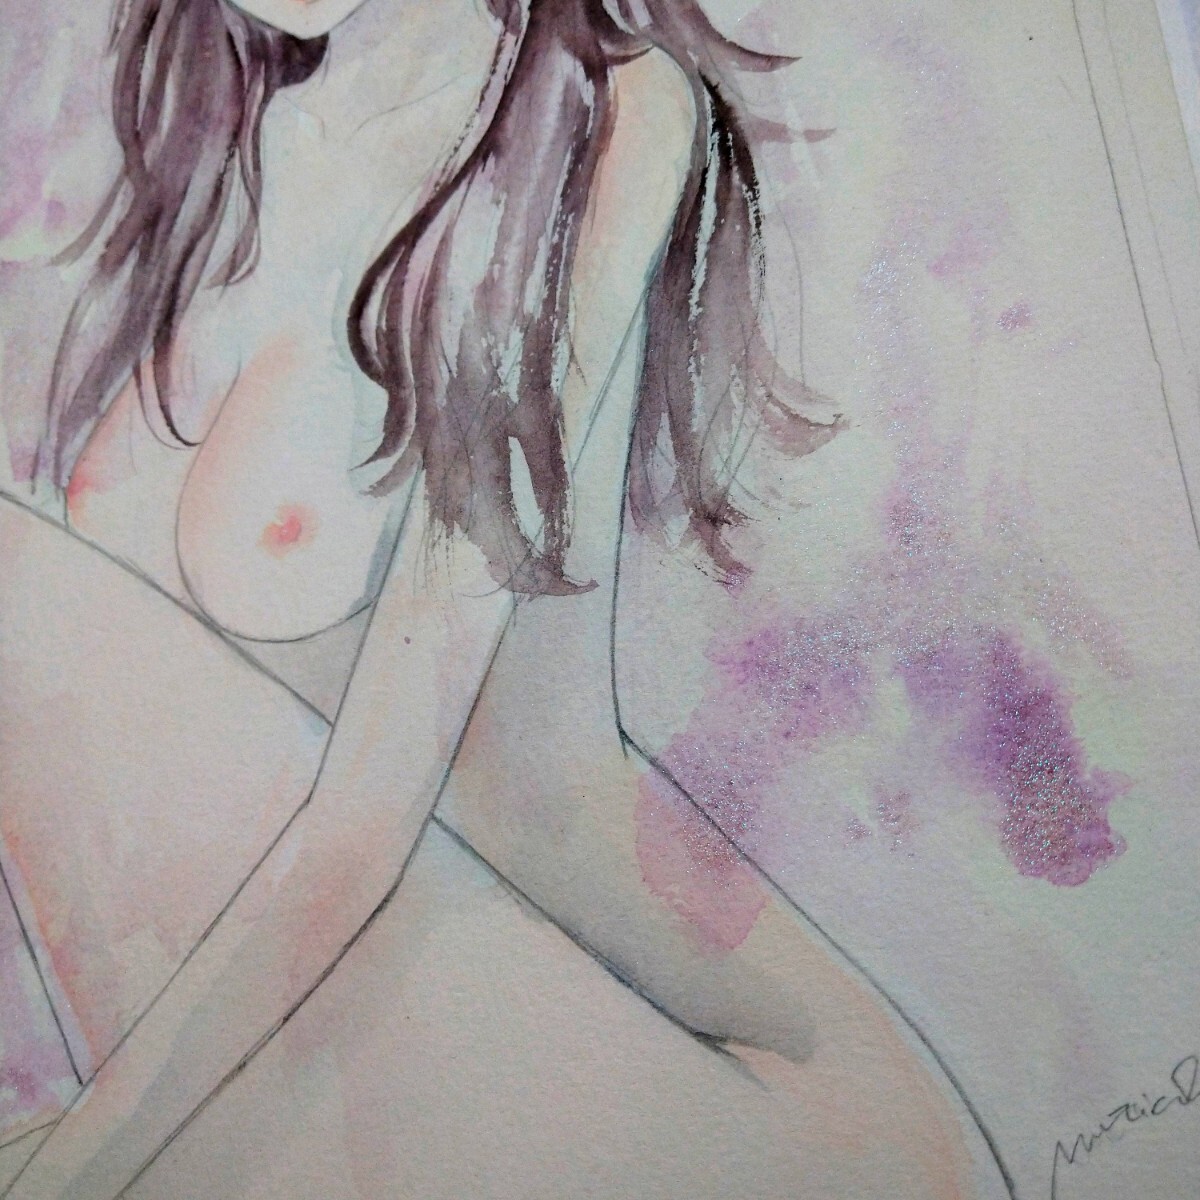  autograph original picture watercolor painting hand-drawn illustrations picture original beauty picture ... nude .A4 @mucica